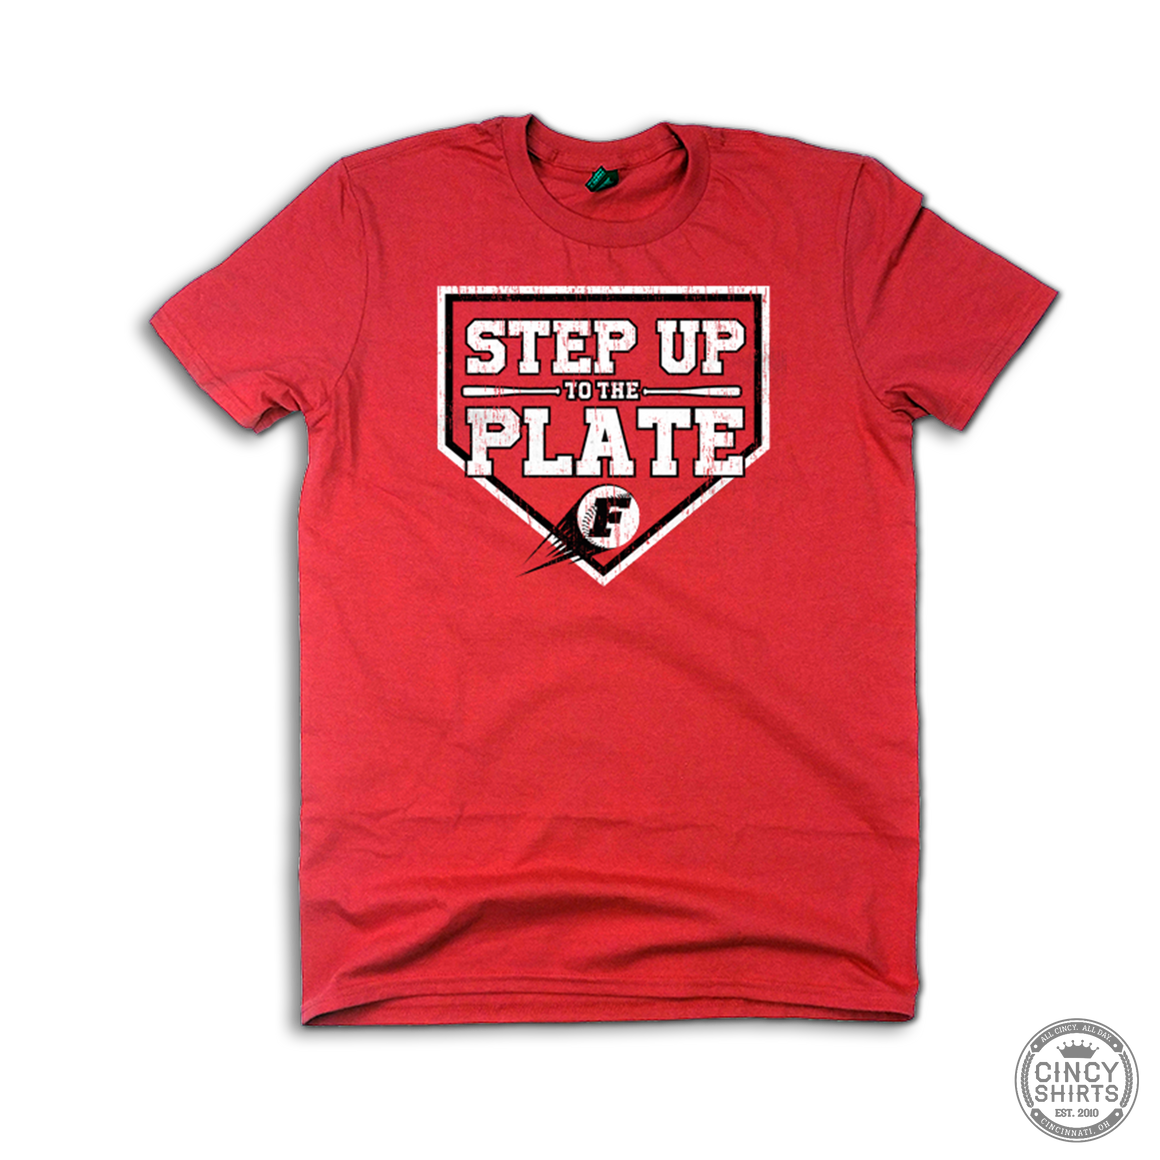 Foster's Force "Step Up to the Plate" - Online Exclusive - Cincy Shirts